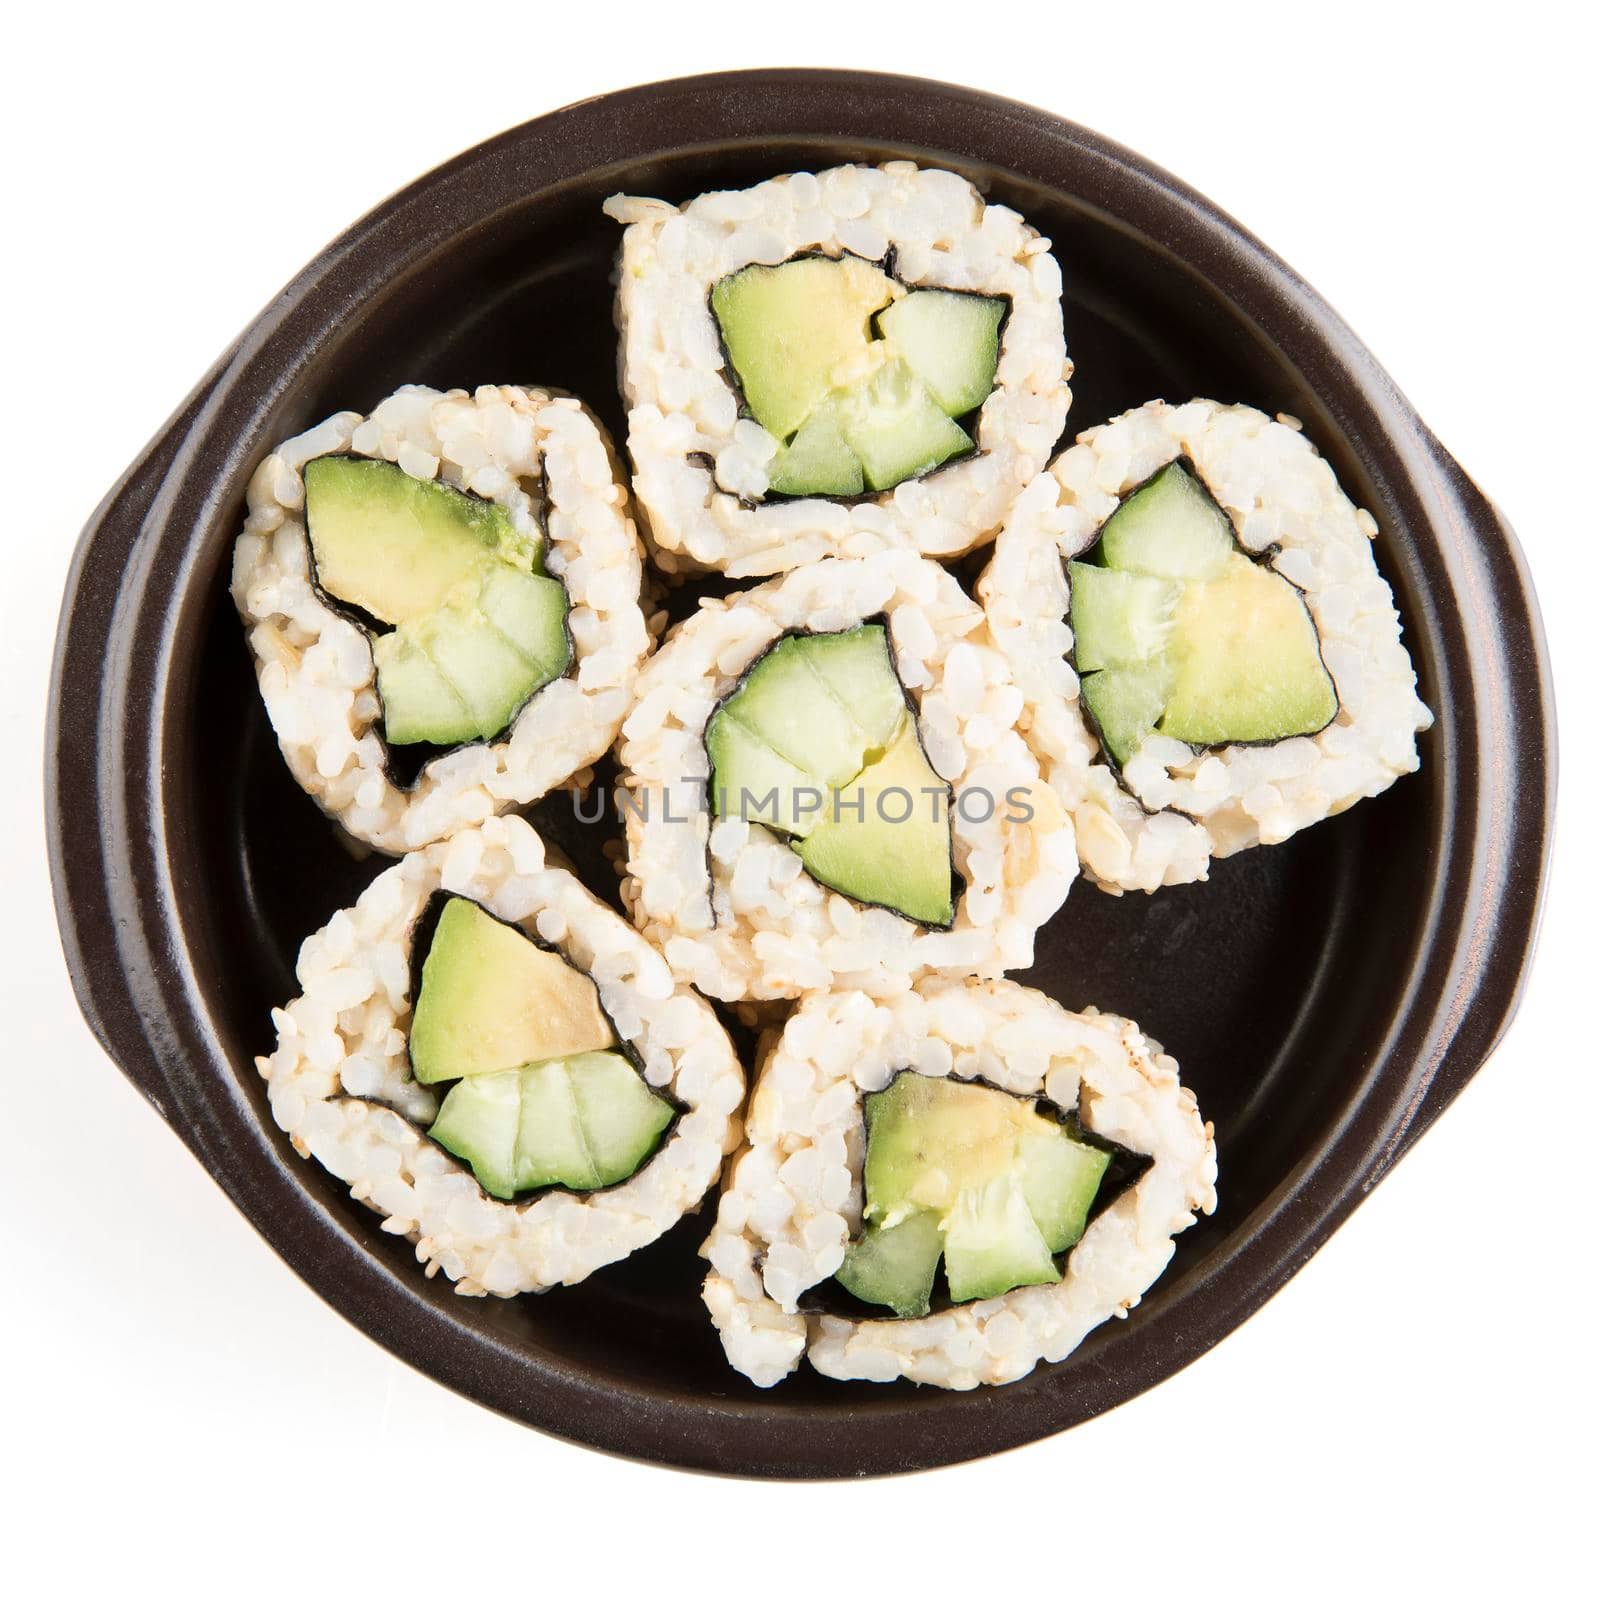 Six vegan cucumber and avocado uramaki rolls in a dish and isolated on a white background.